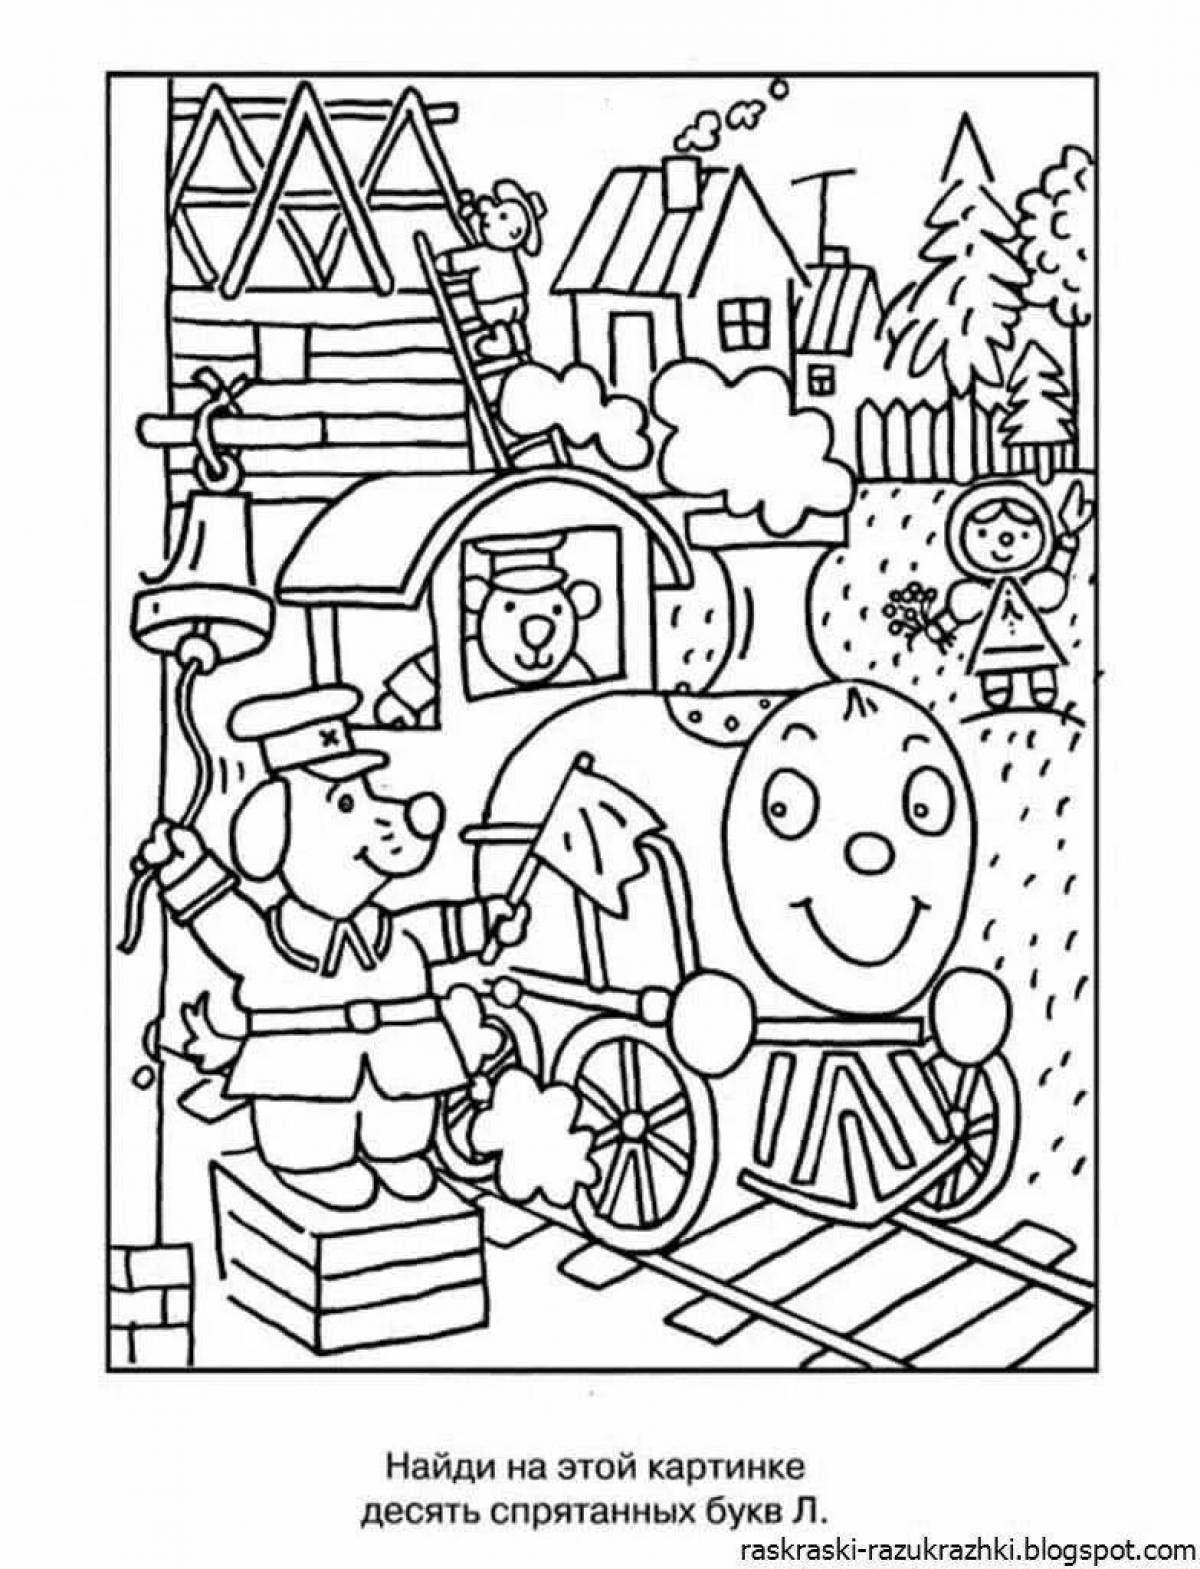 Great coloring book where to find